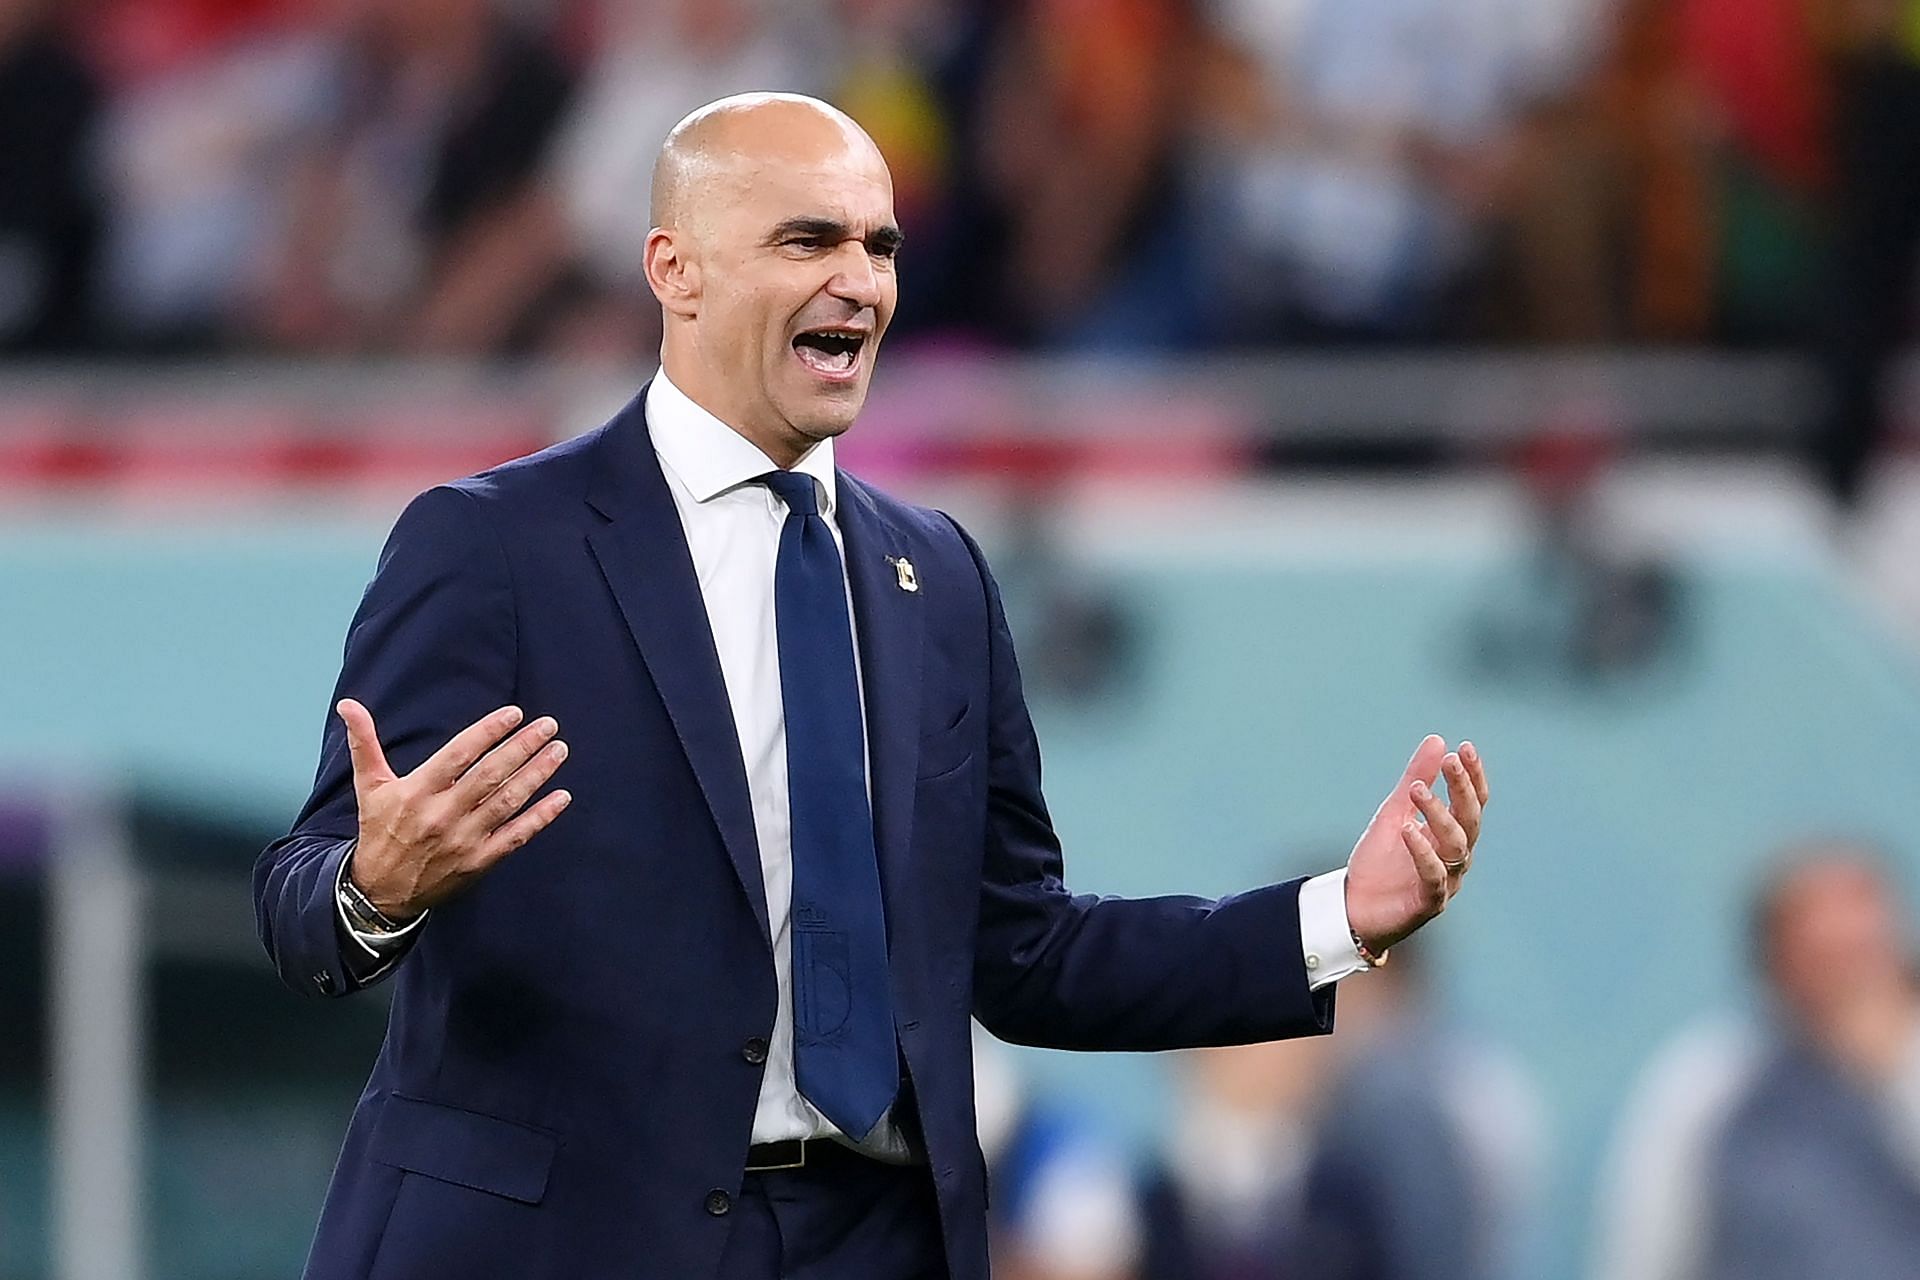 Long-time Belgium coach Roberto Martinez finally chose to leave his role after his team's shock exit